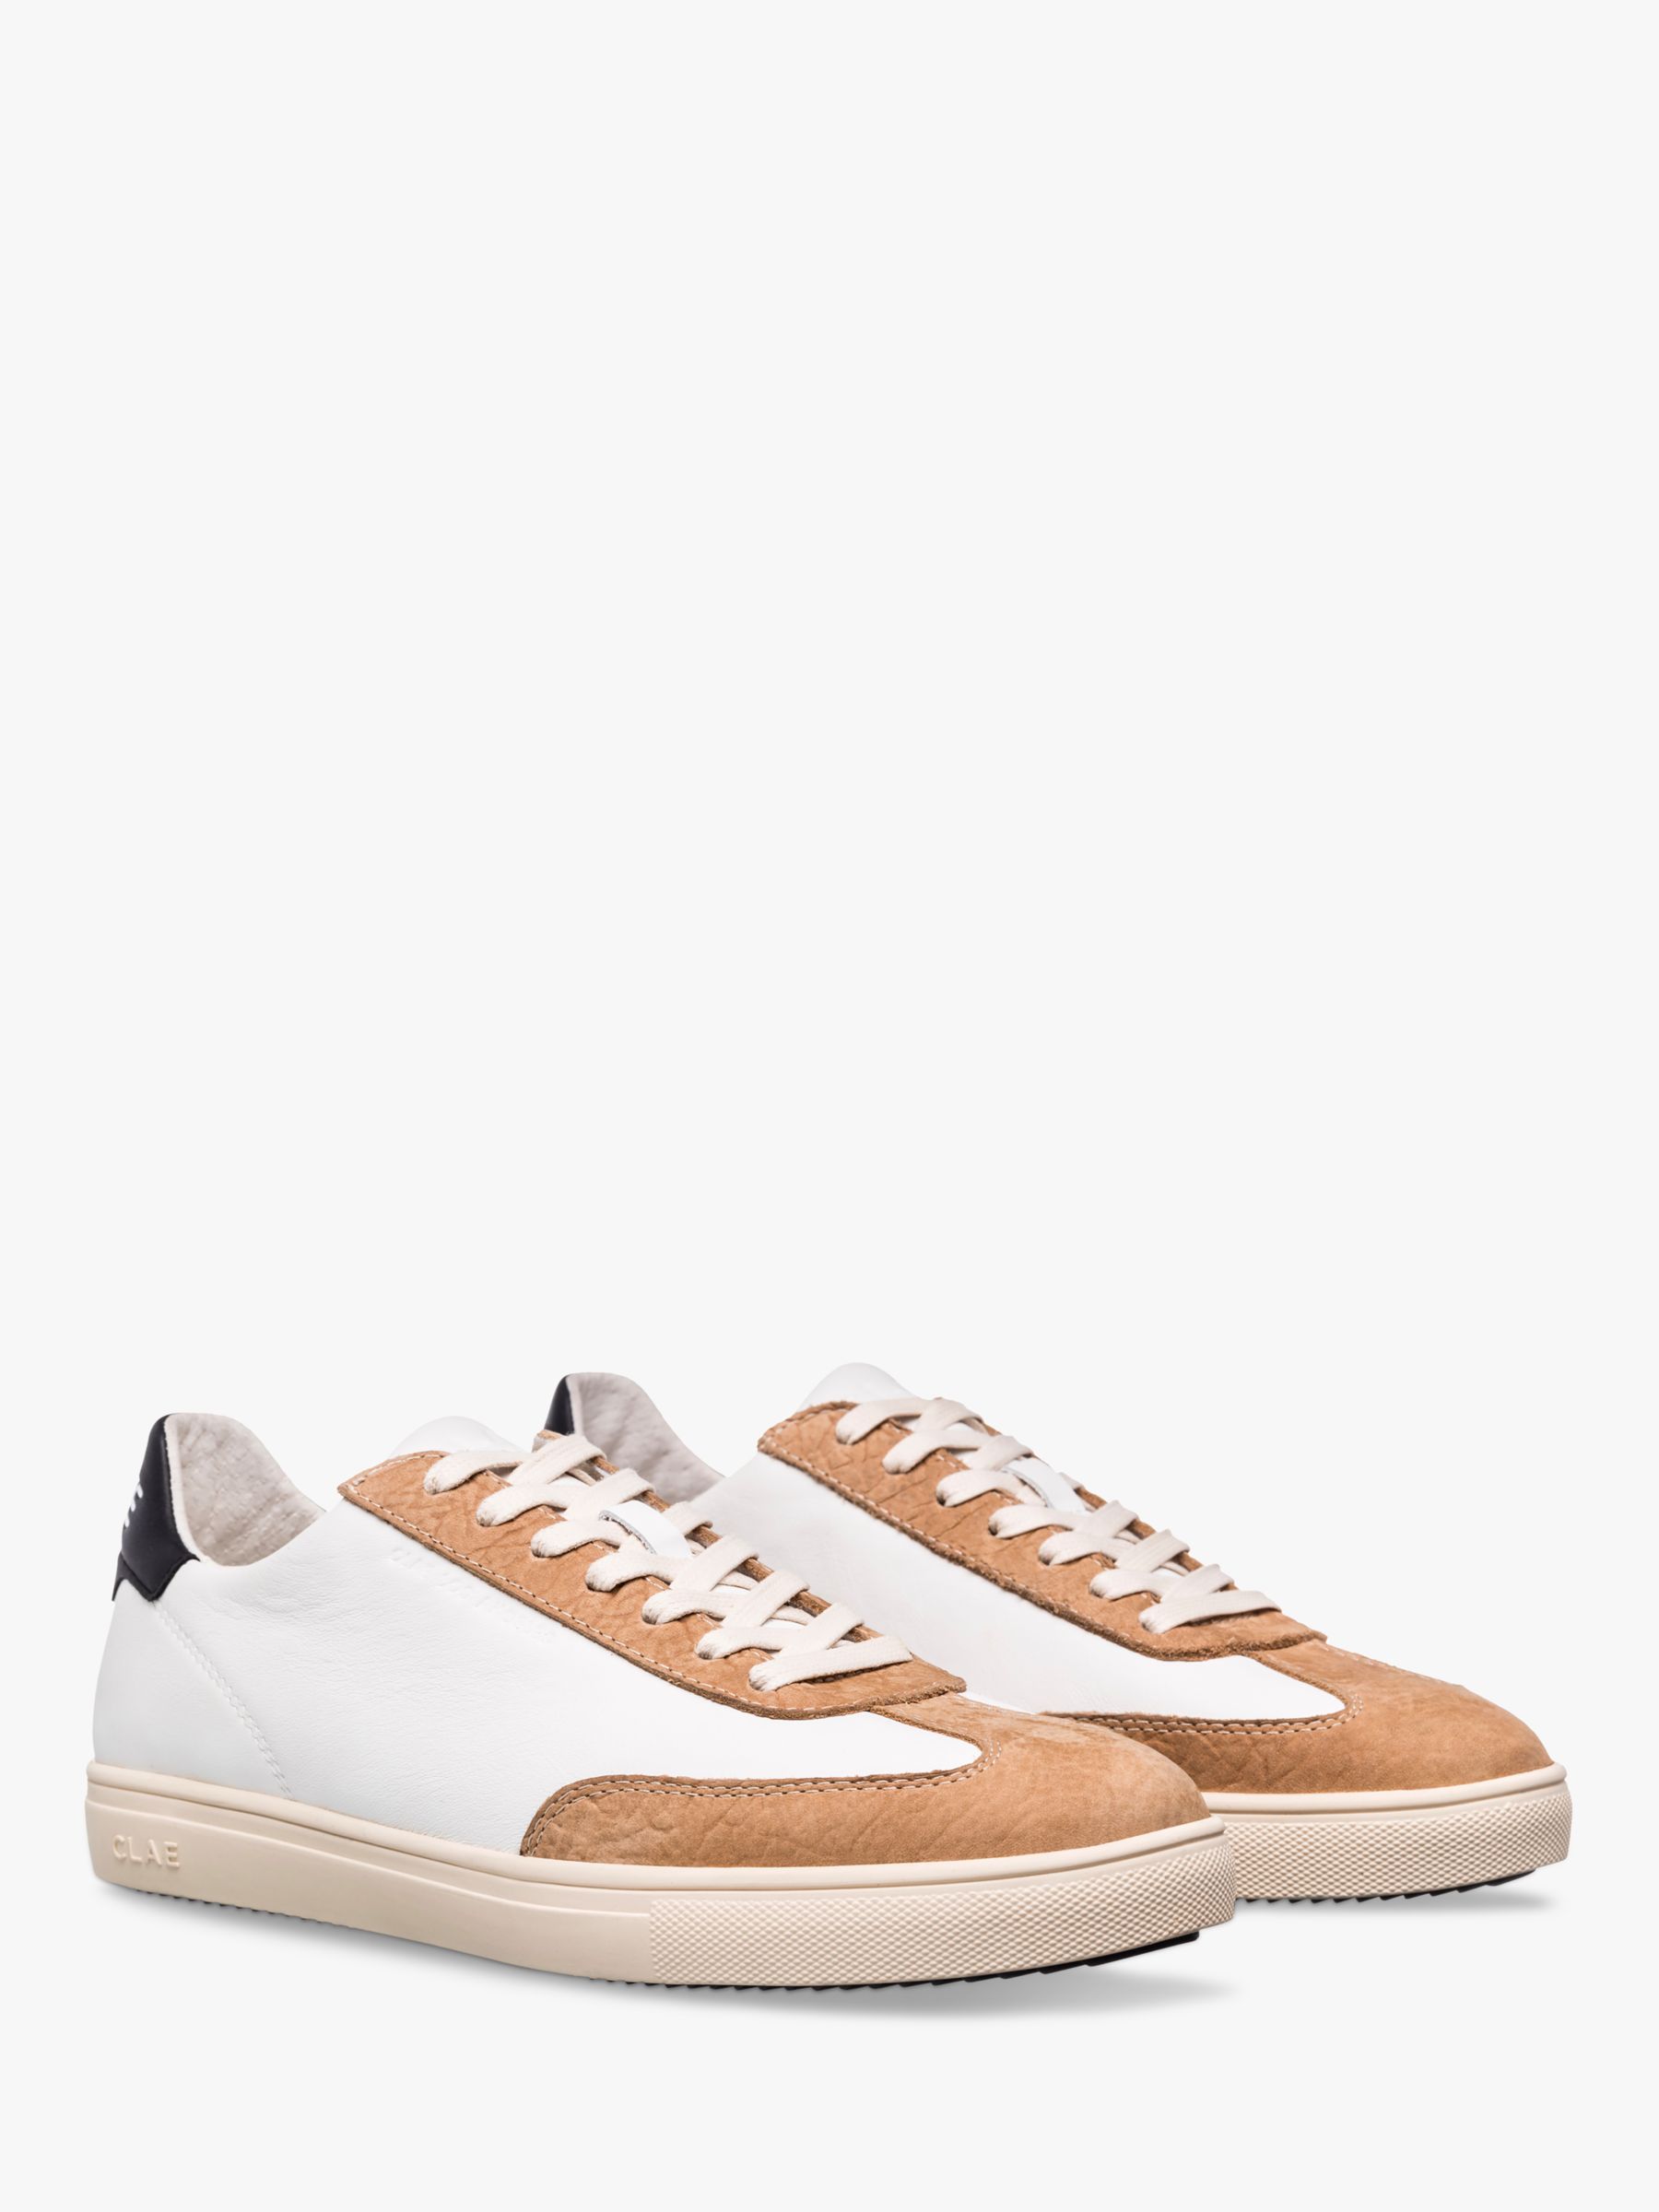 Buy CLAE Deane Leather Trainers Online at johnlewis.com